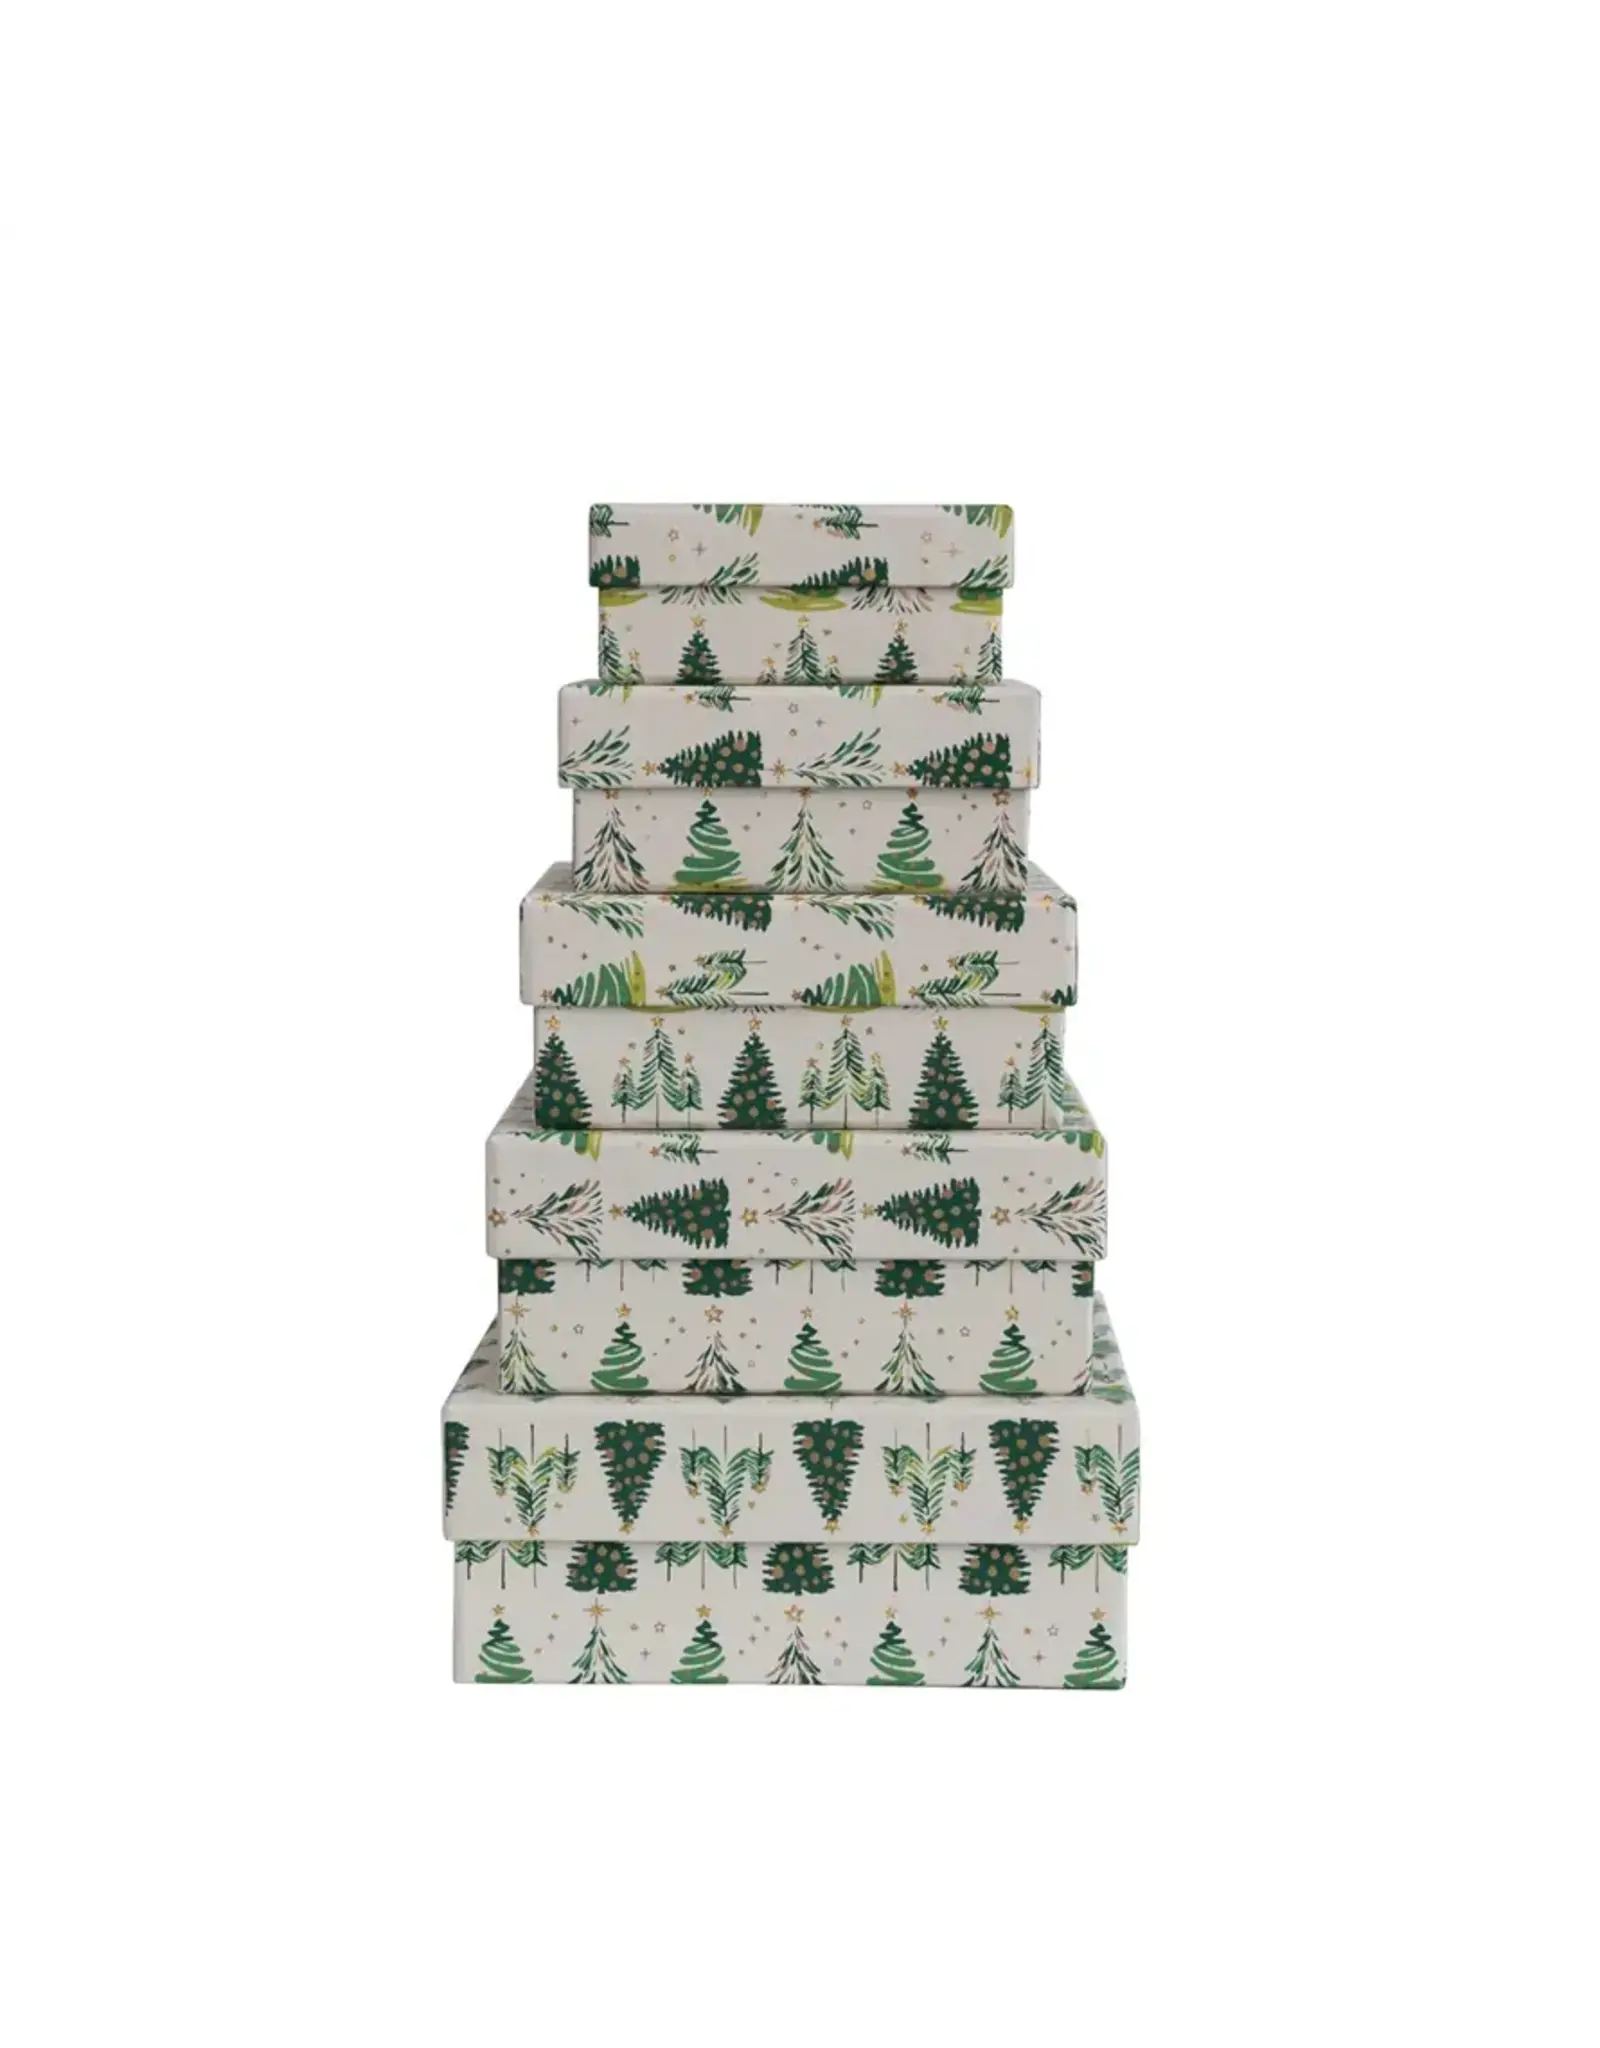 Printed Recycled Paper Gift Boxes w/ Tree Pattern & Gold Metallic Ink, Multi Color, Set of 5 XS2978